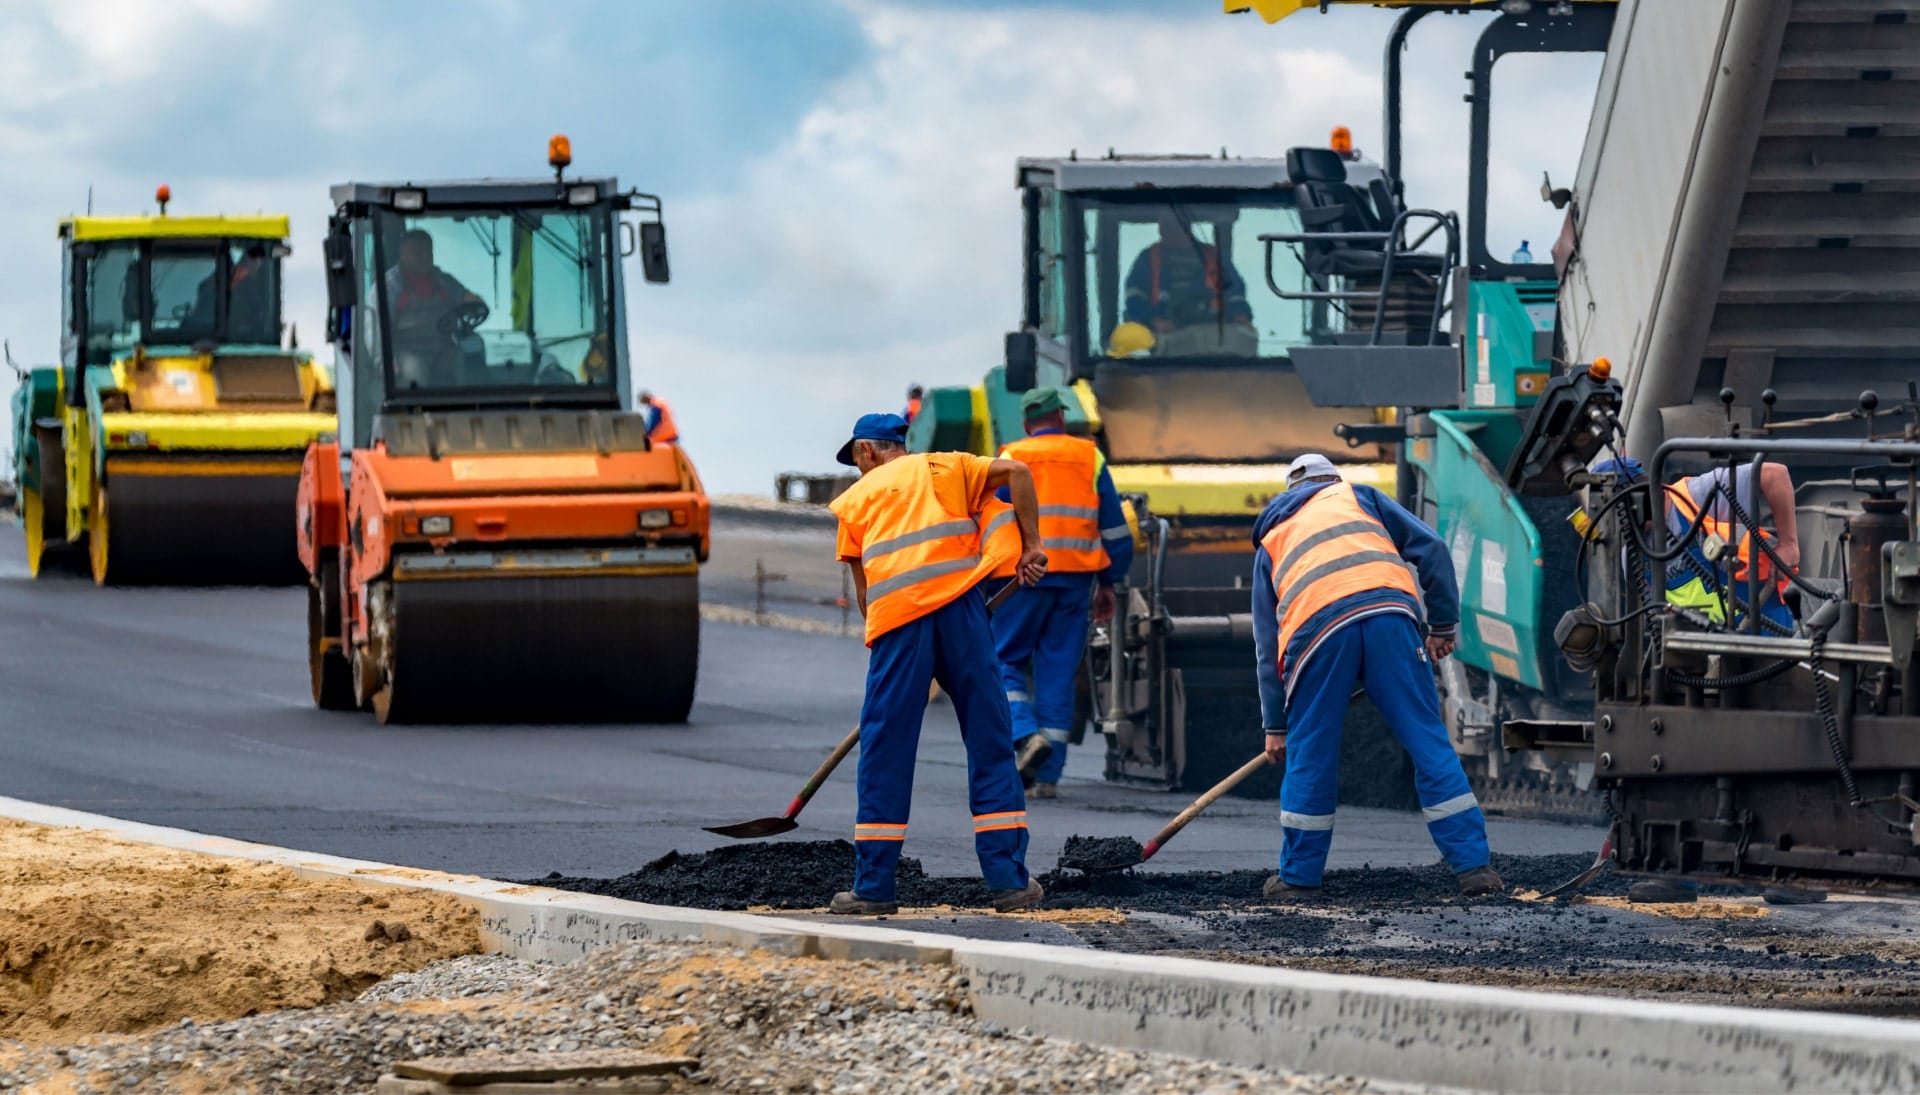 Reliable asphalt construction services in Waukesha, WI for various projects.